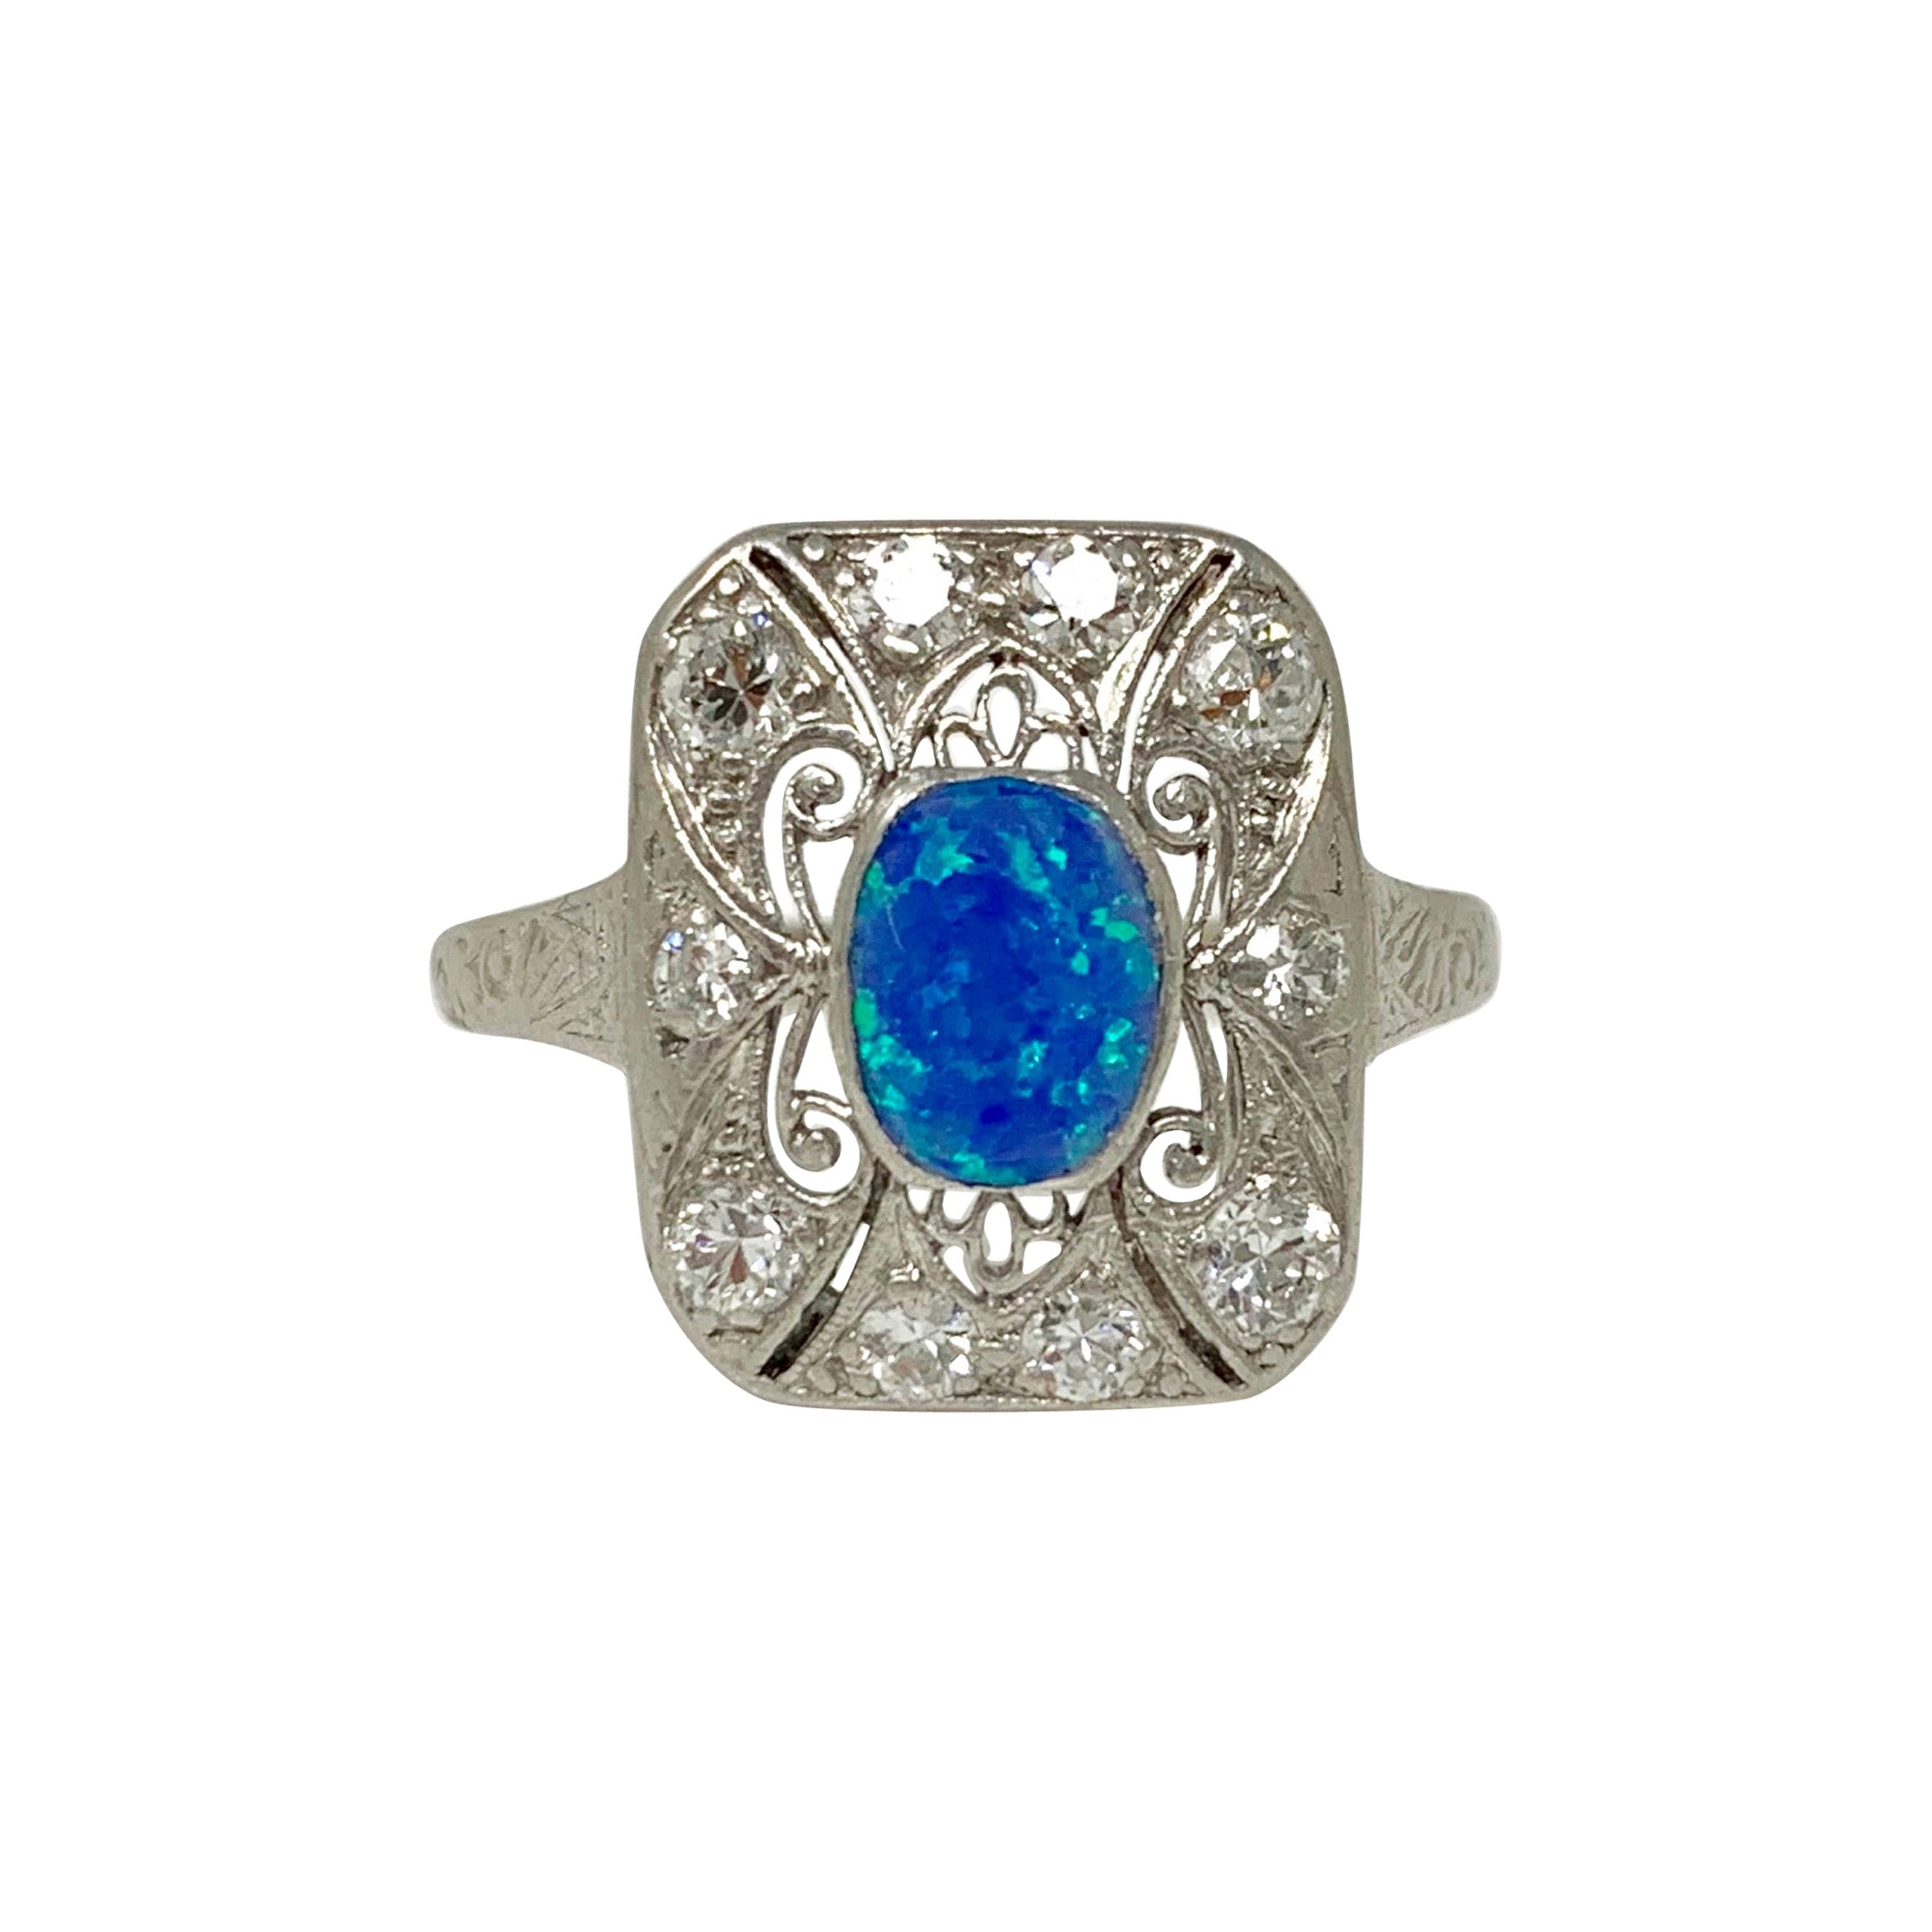 1920 Antique Opal And Diamond Ring in Platinum